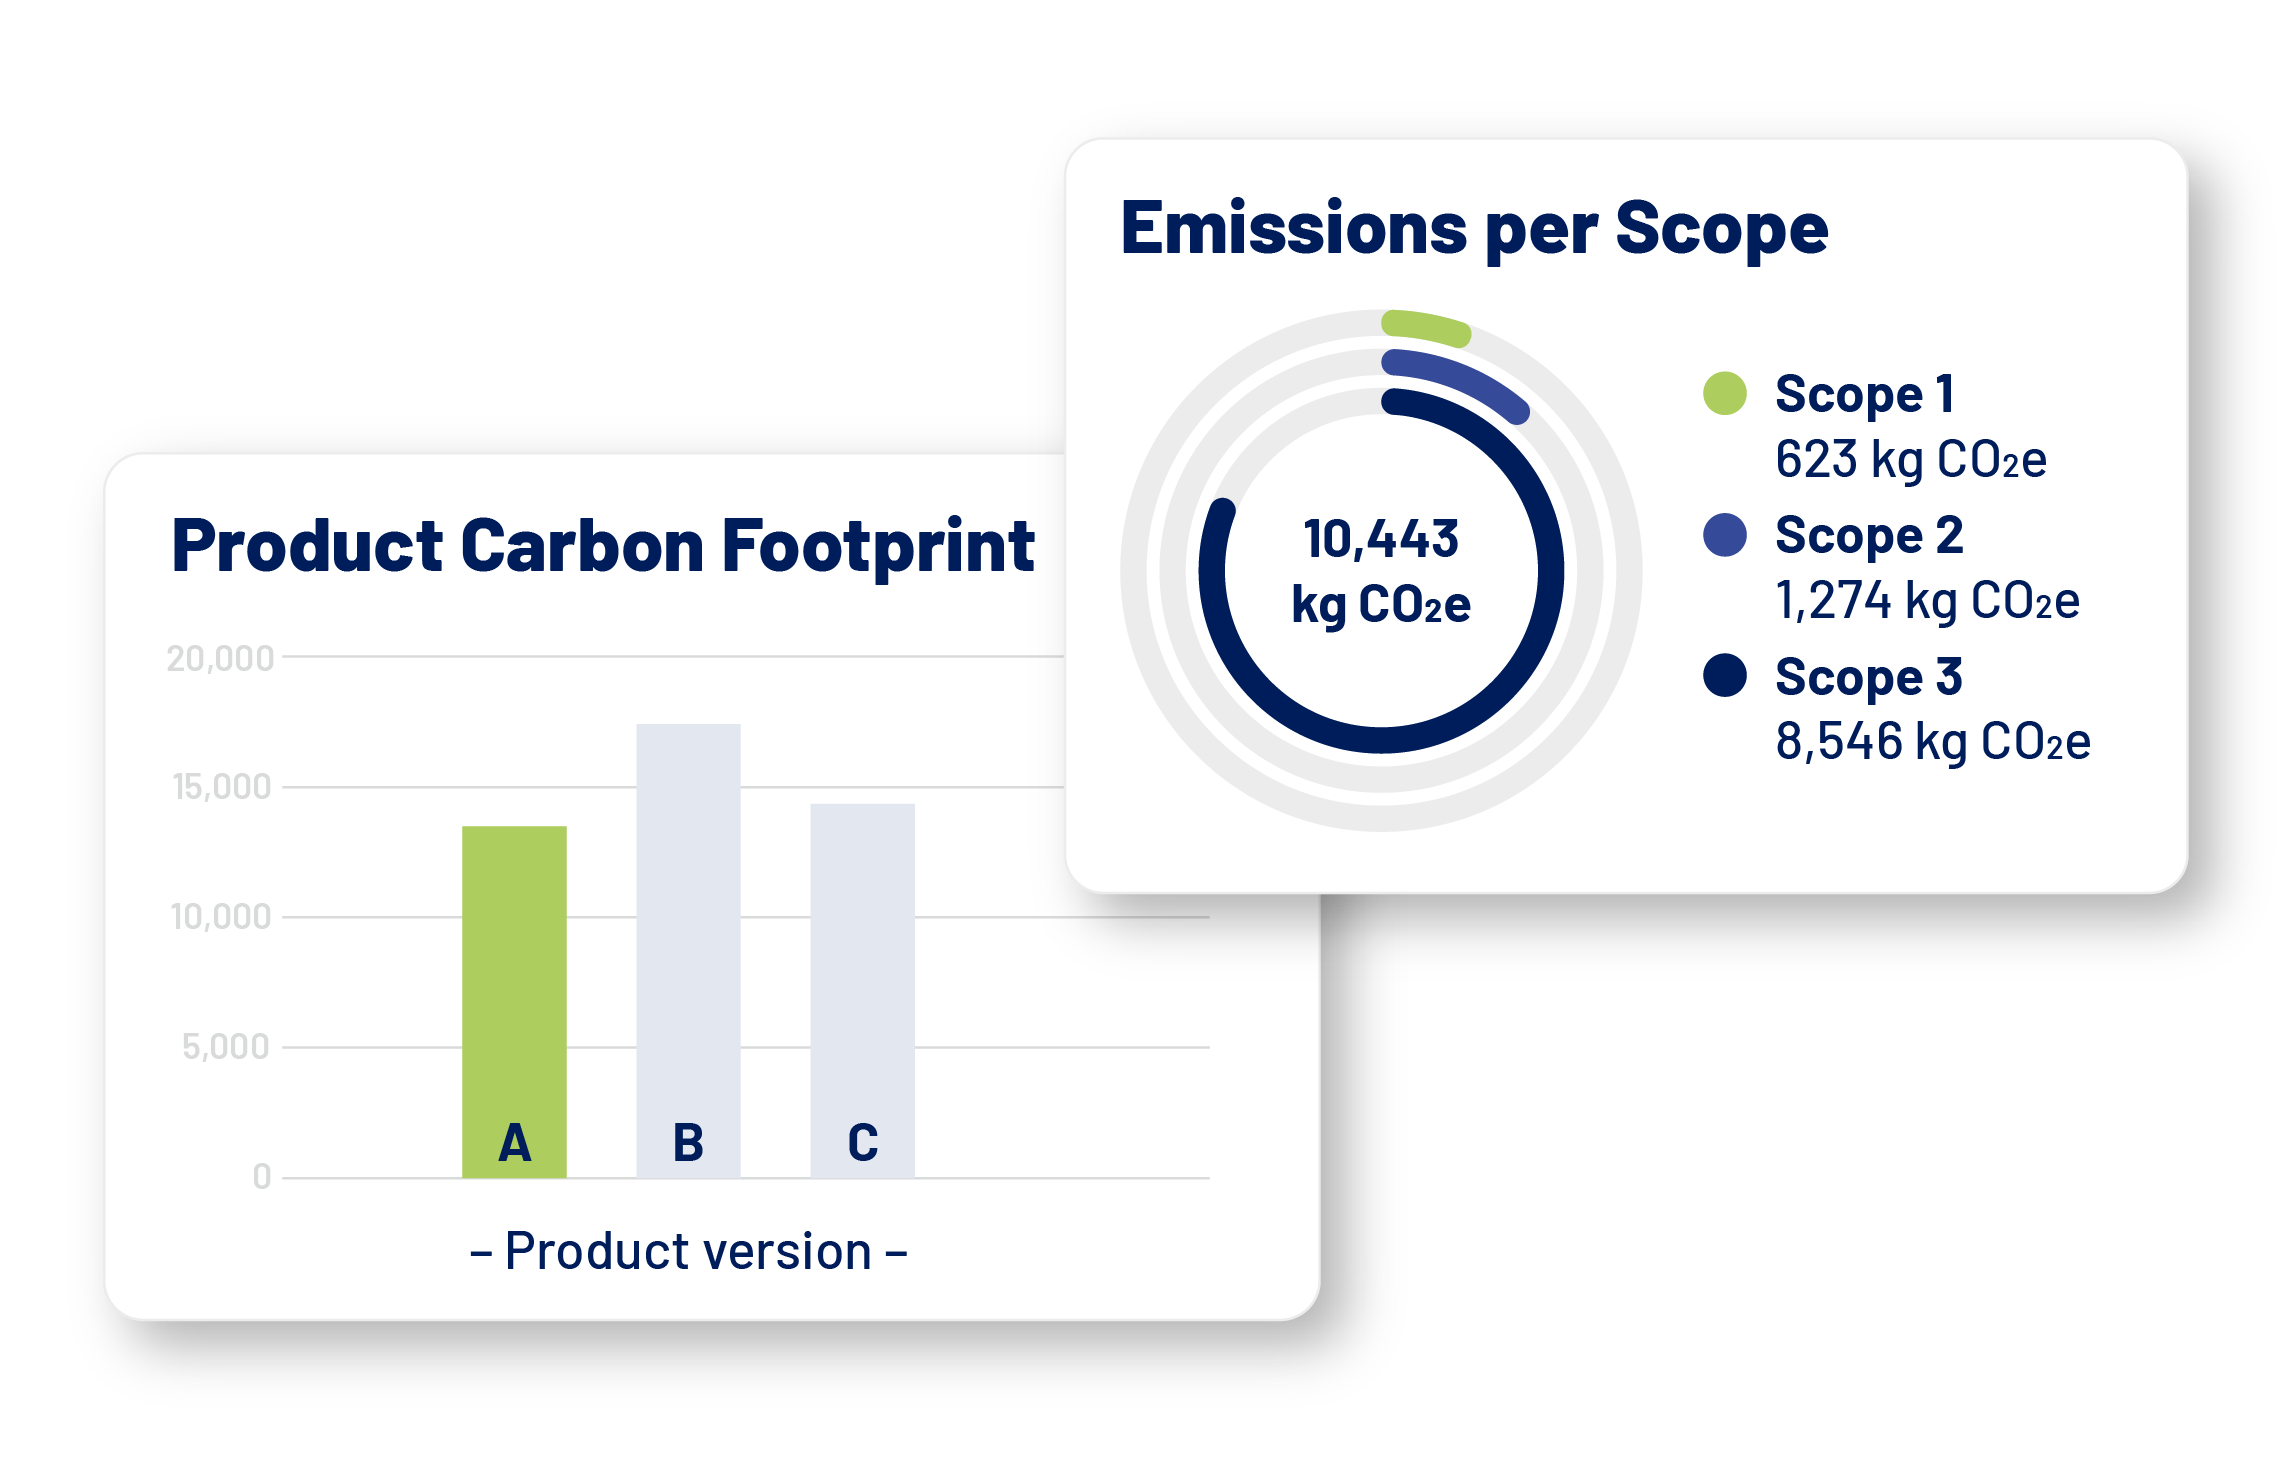 Infographic with an example analysis of a product's emissions based on application area and product version